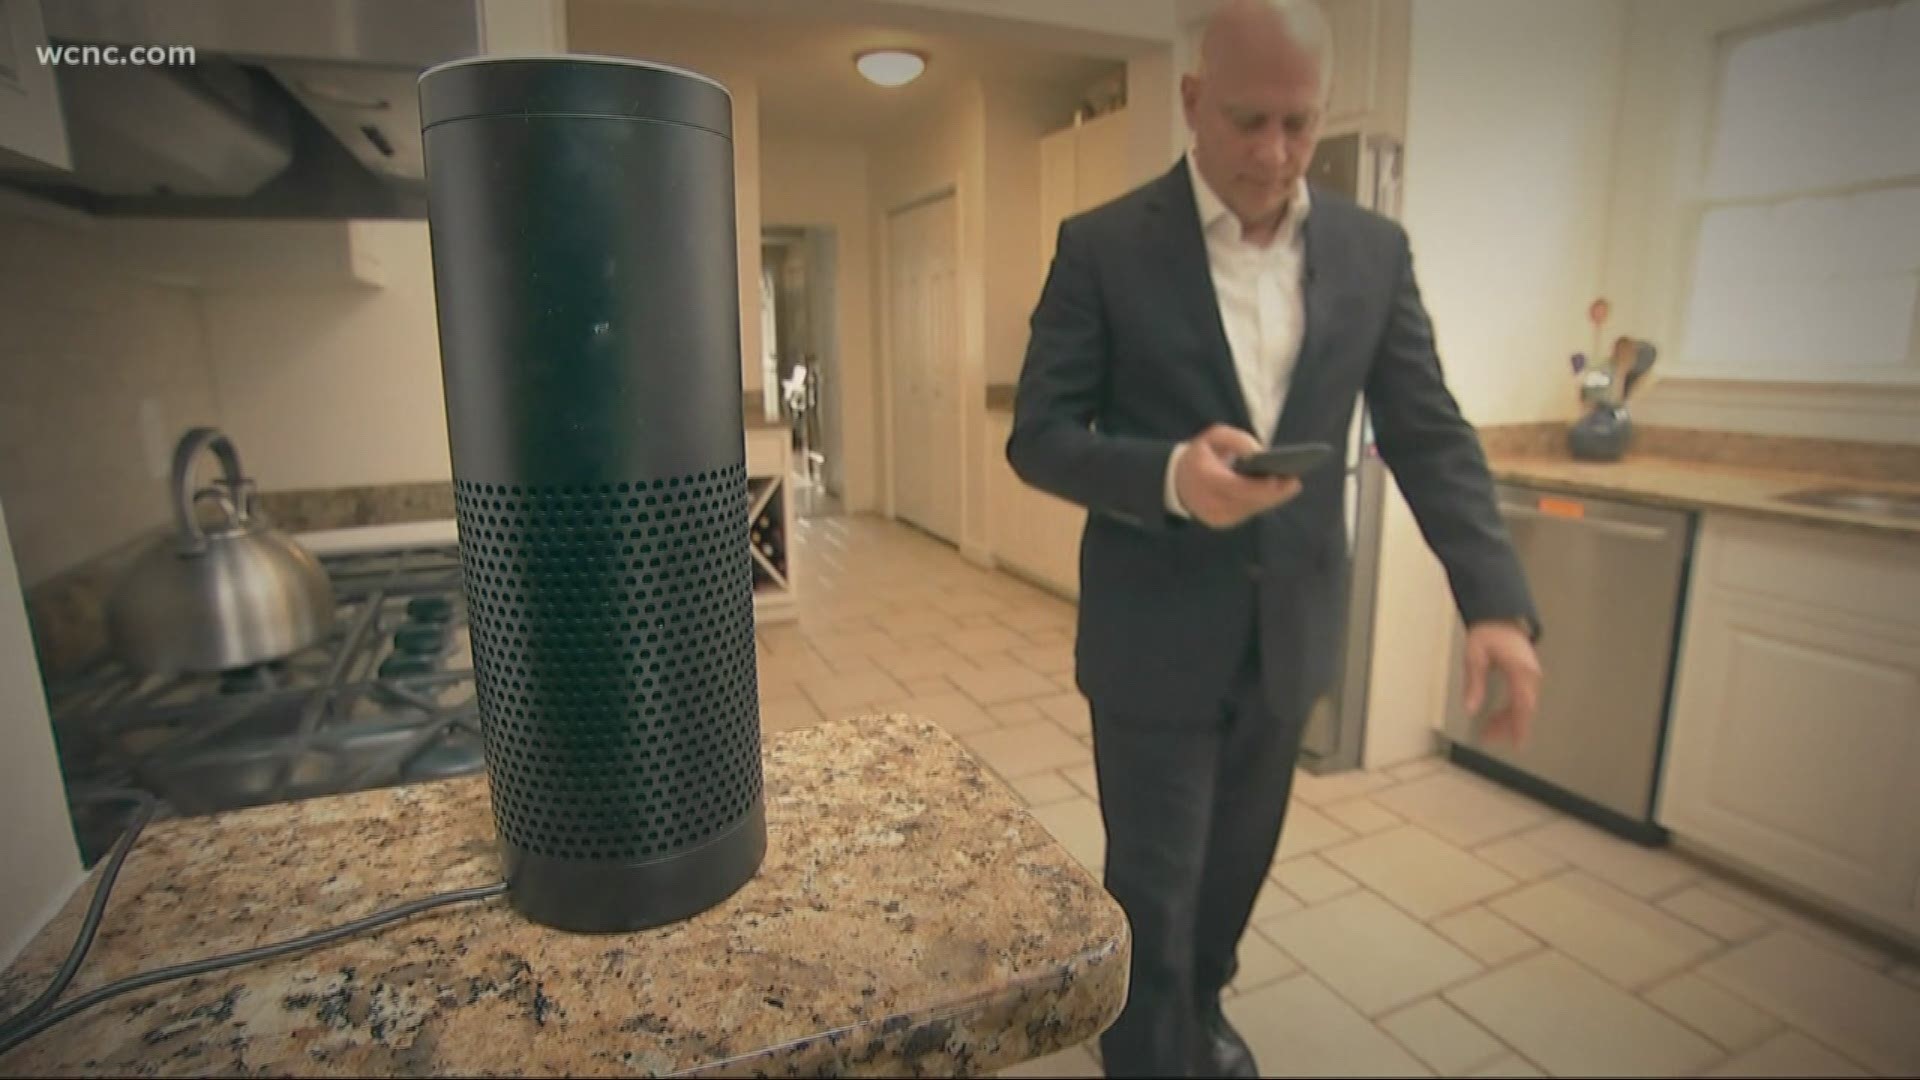 If you ever experience a heart attack or medical emergency, researchers say Alexa could save your life. It's part of a new tool that recognizes the signs of a heart attack that they say is 97% accurate.